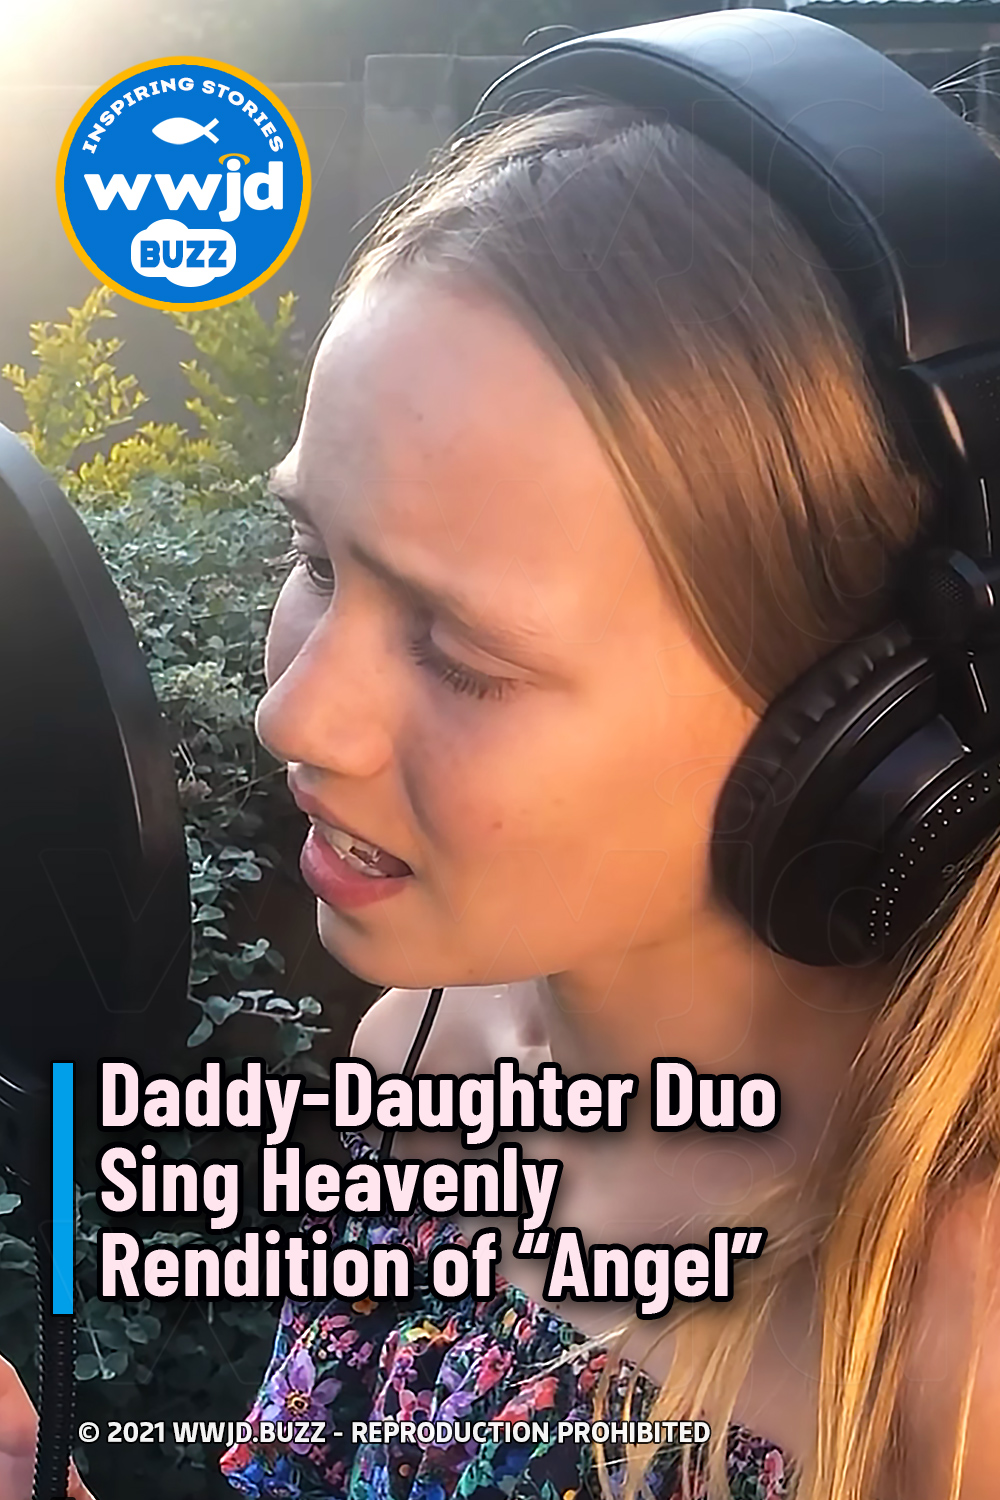 Daddy-Daughter Duo Sing Heavenly Rendition of “Angel”